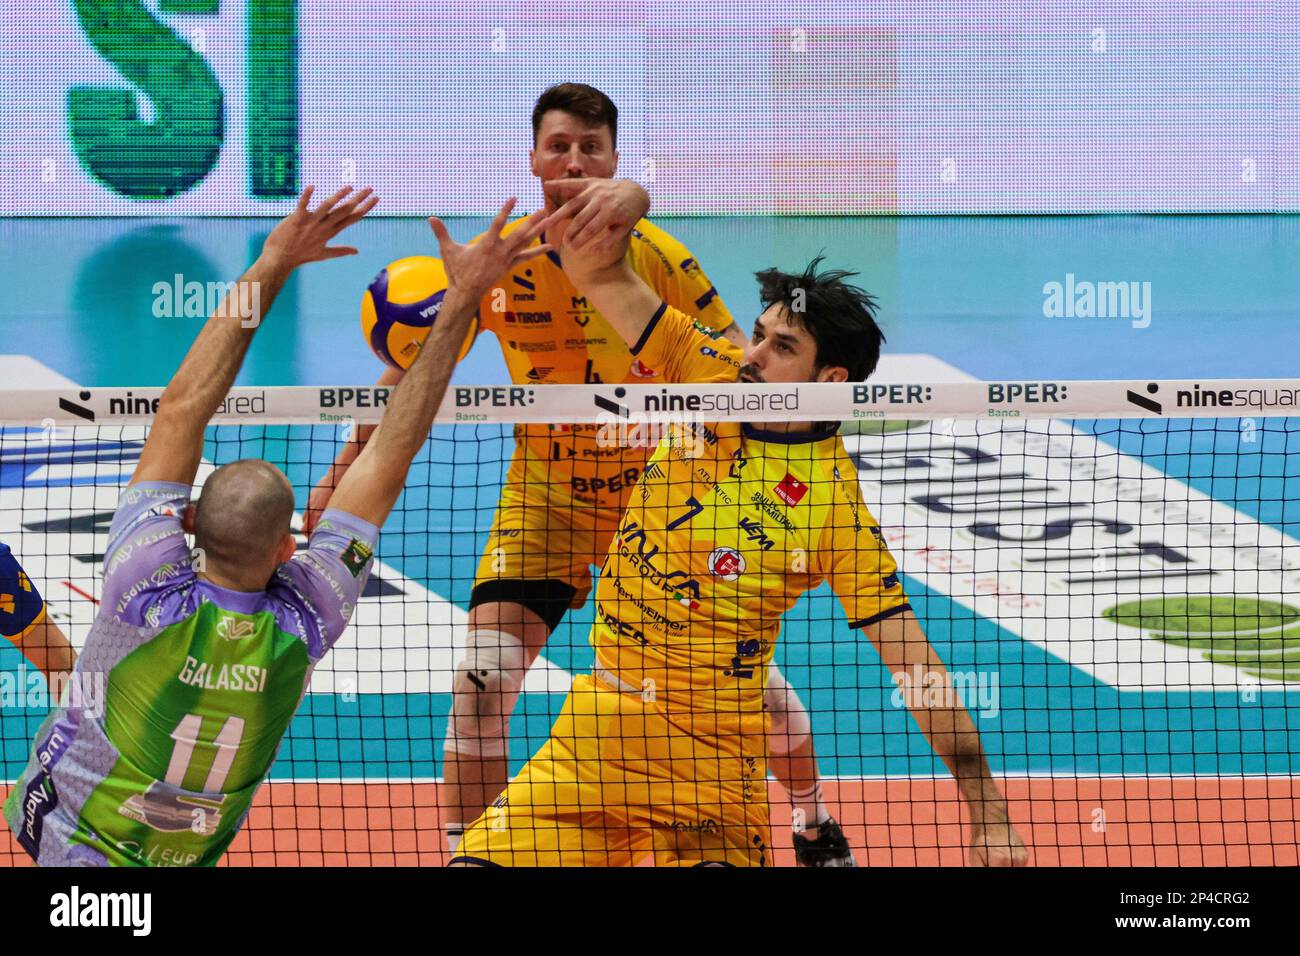 Dragan Stankovic and Gianluca Galassi (Valsa Group Modena)(Vero Volley Monza) In action during the match of SuperLega Volley Italian Championship seas Stock Photo